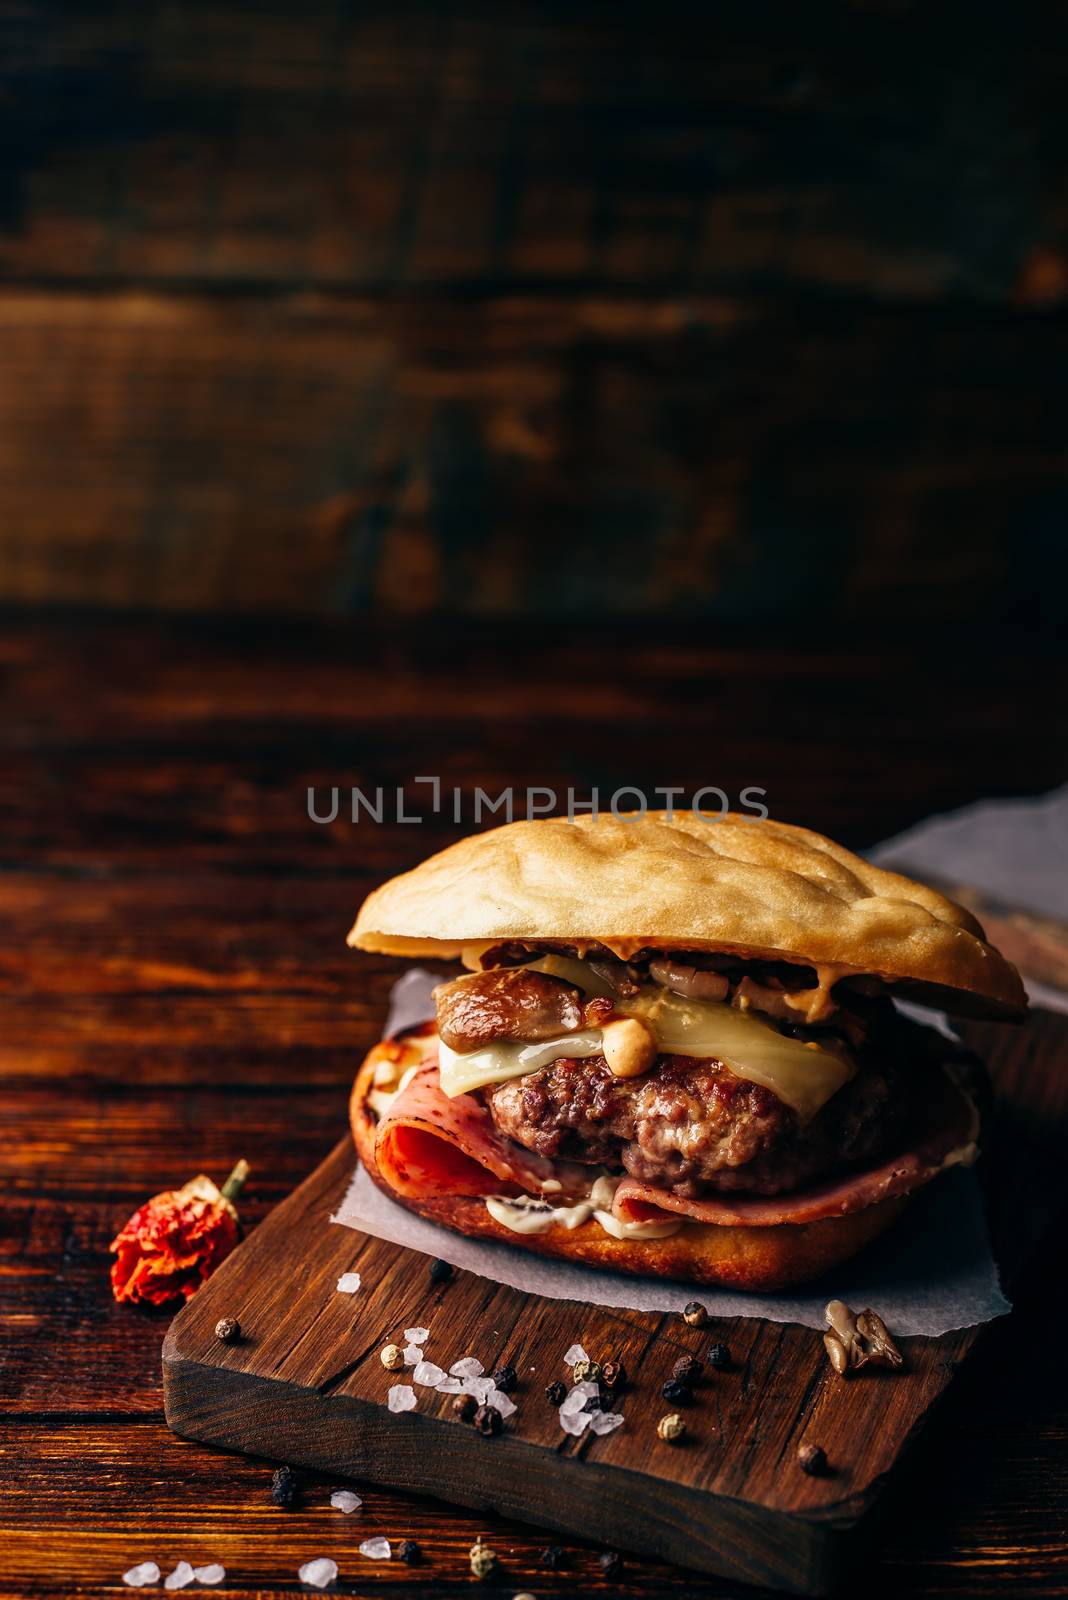 Cheeseburger with Beef Patty, Wisconsin Swiss Cheese, Ham, Sauteed Mushrooms, Dijon Mustard, Mayonnaise and Potato Roll. Vertical Orientation and Copy Space.